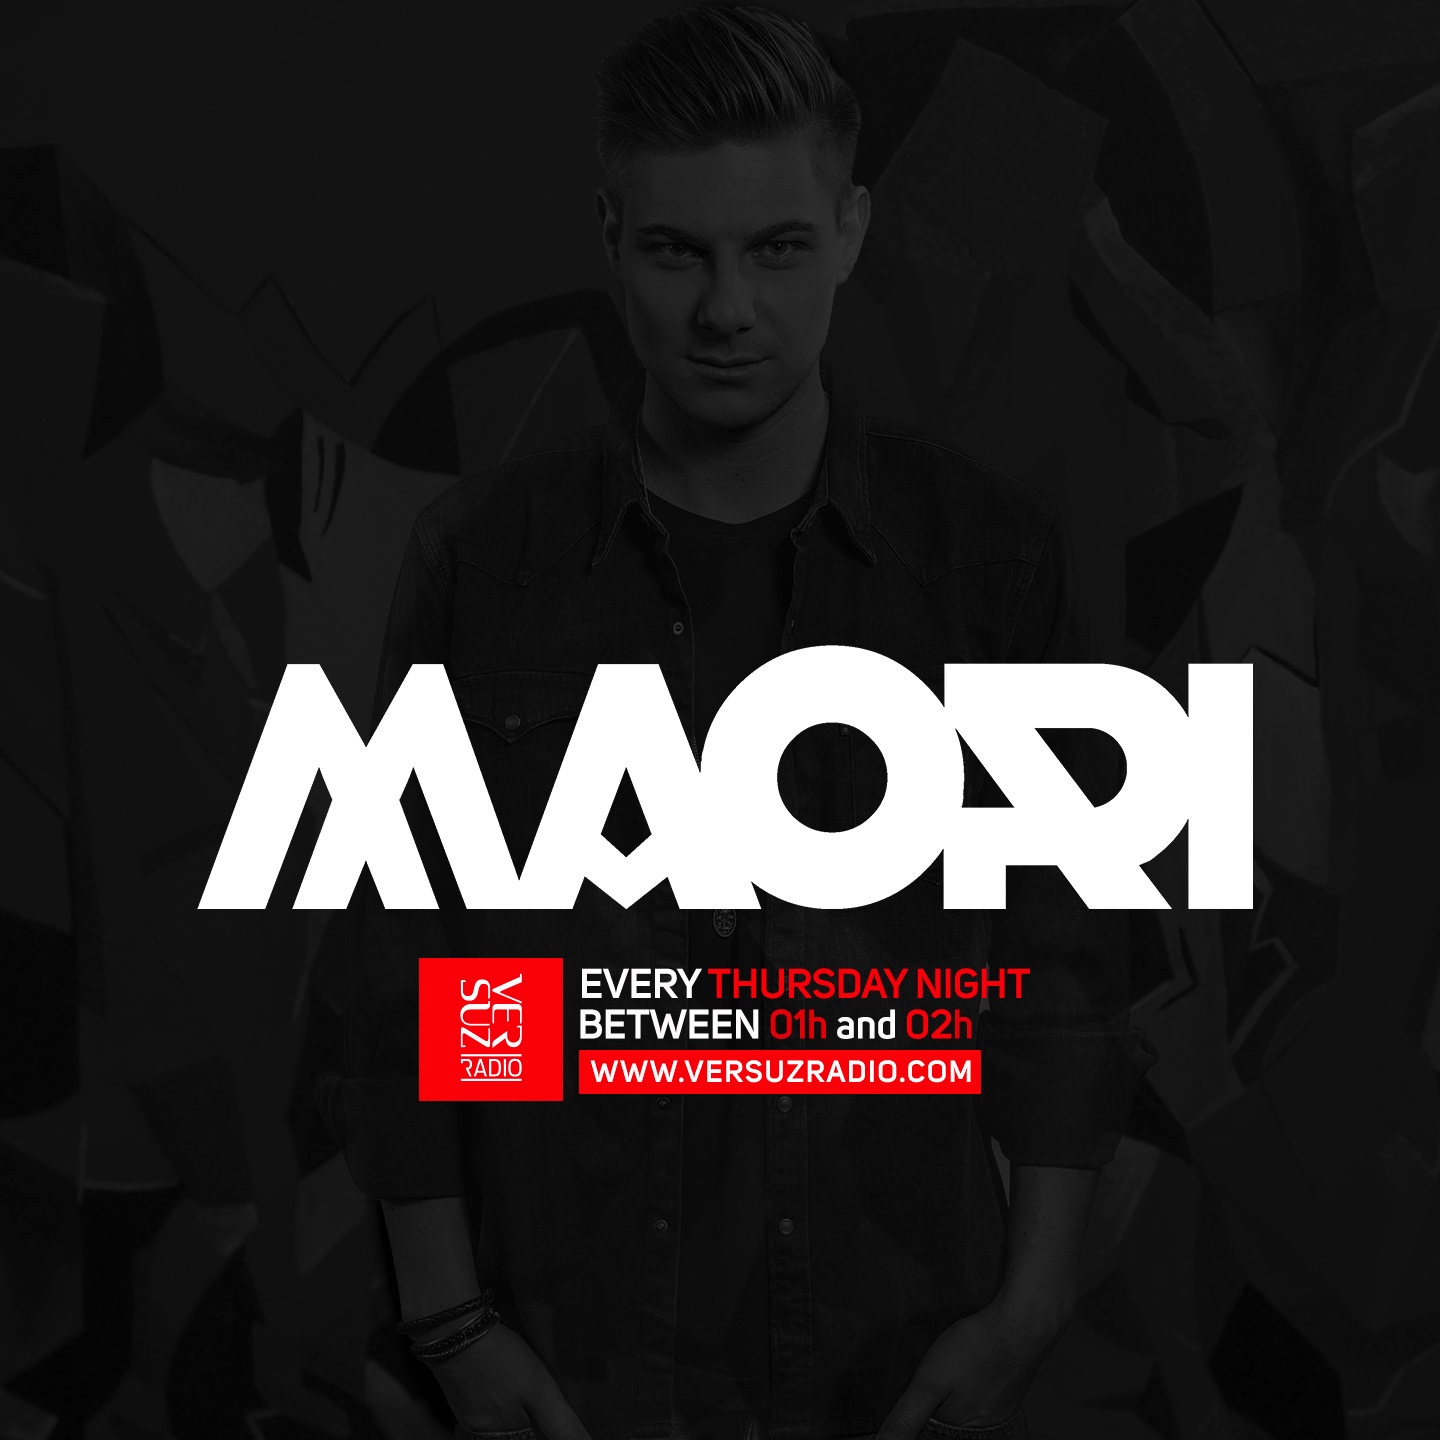 Clubhouse Radio by Maori - Episode #002